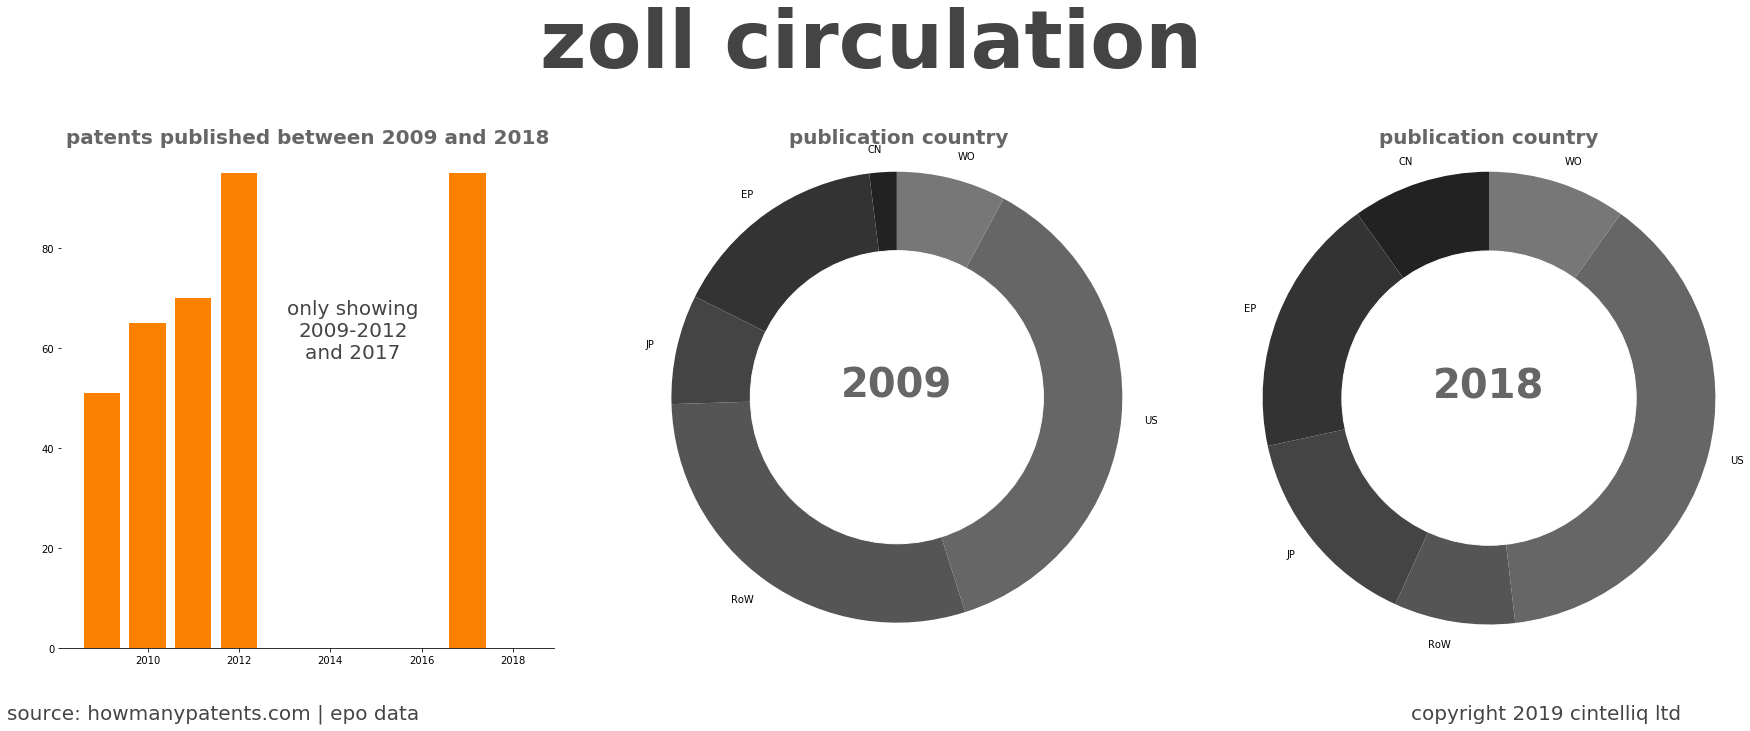 summary of patents for Zoll Circulation